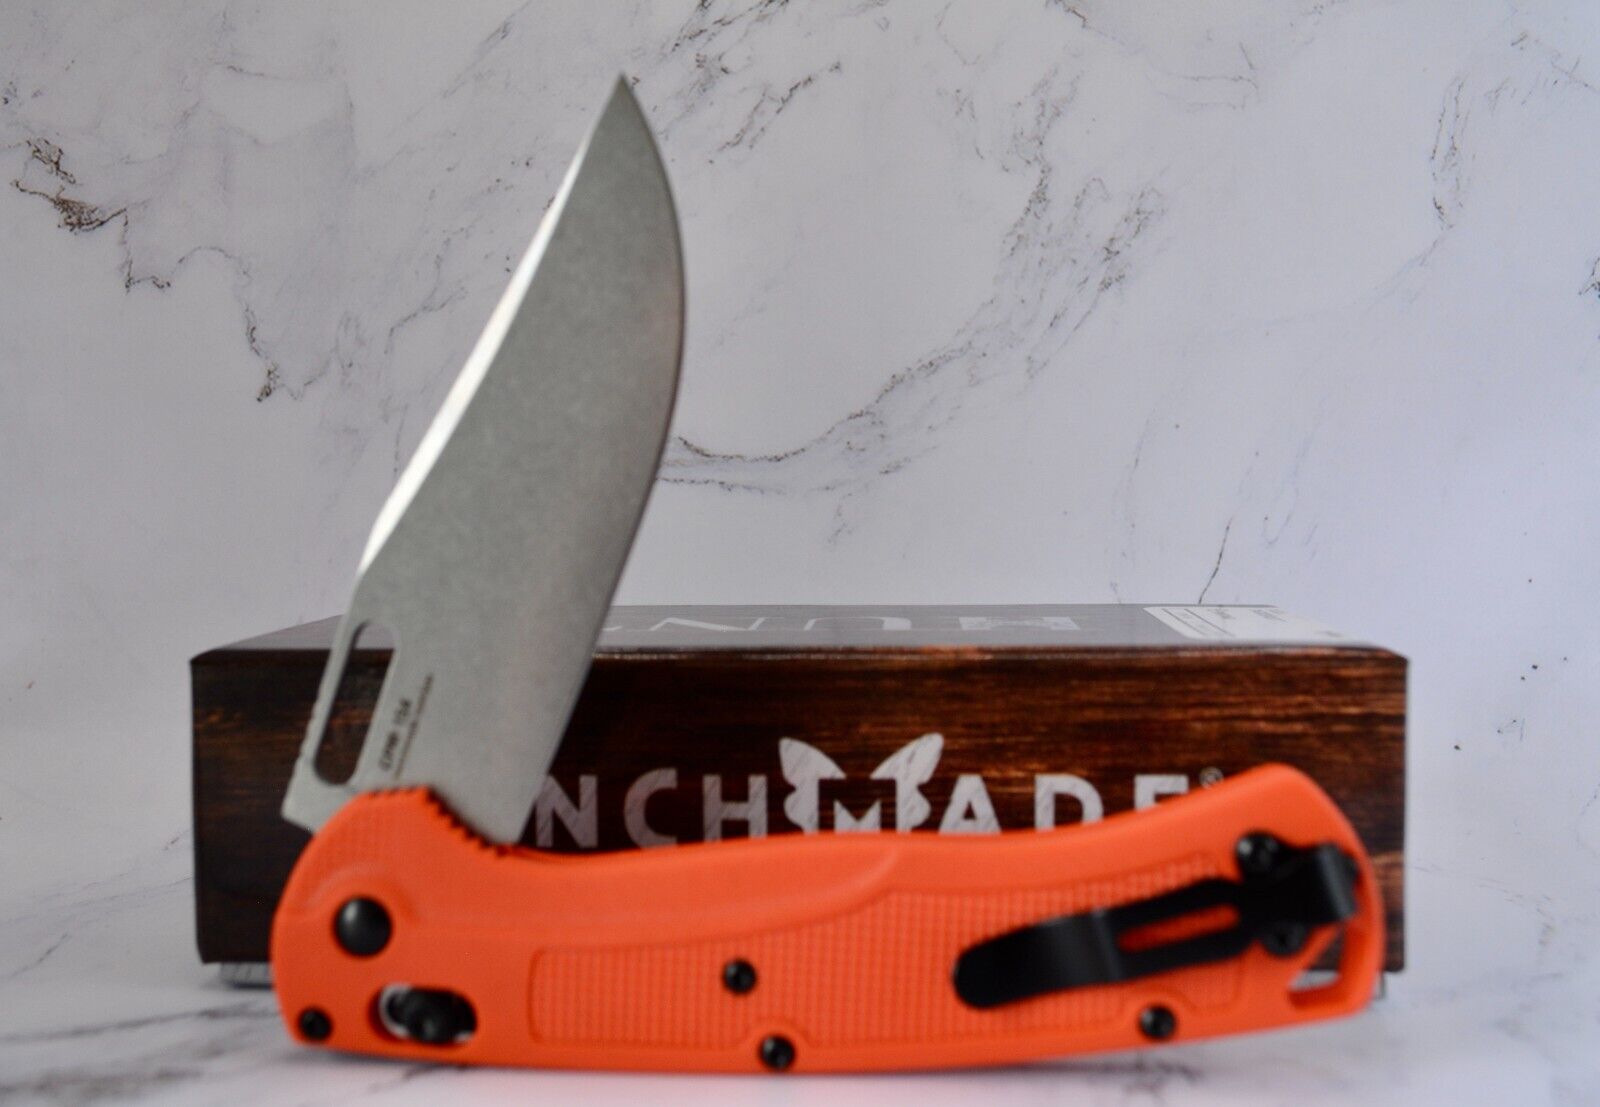 Benchmade Taggedout 15535 Hunting Knife with Orange G10 Handle